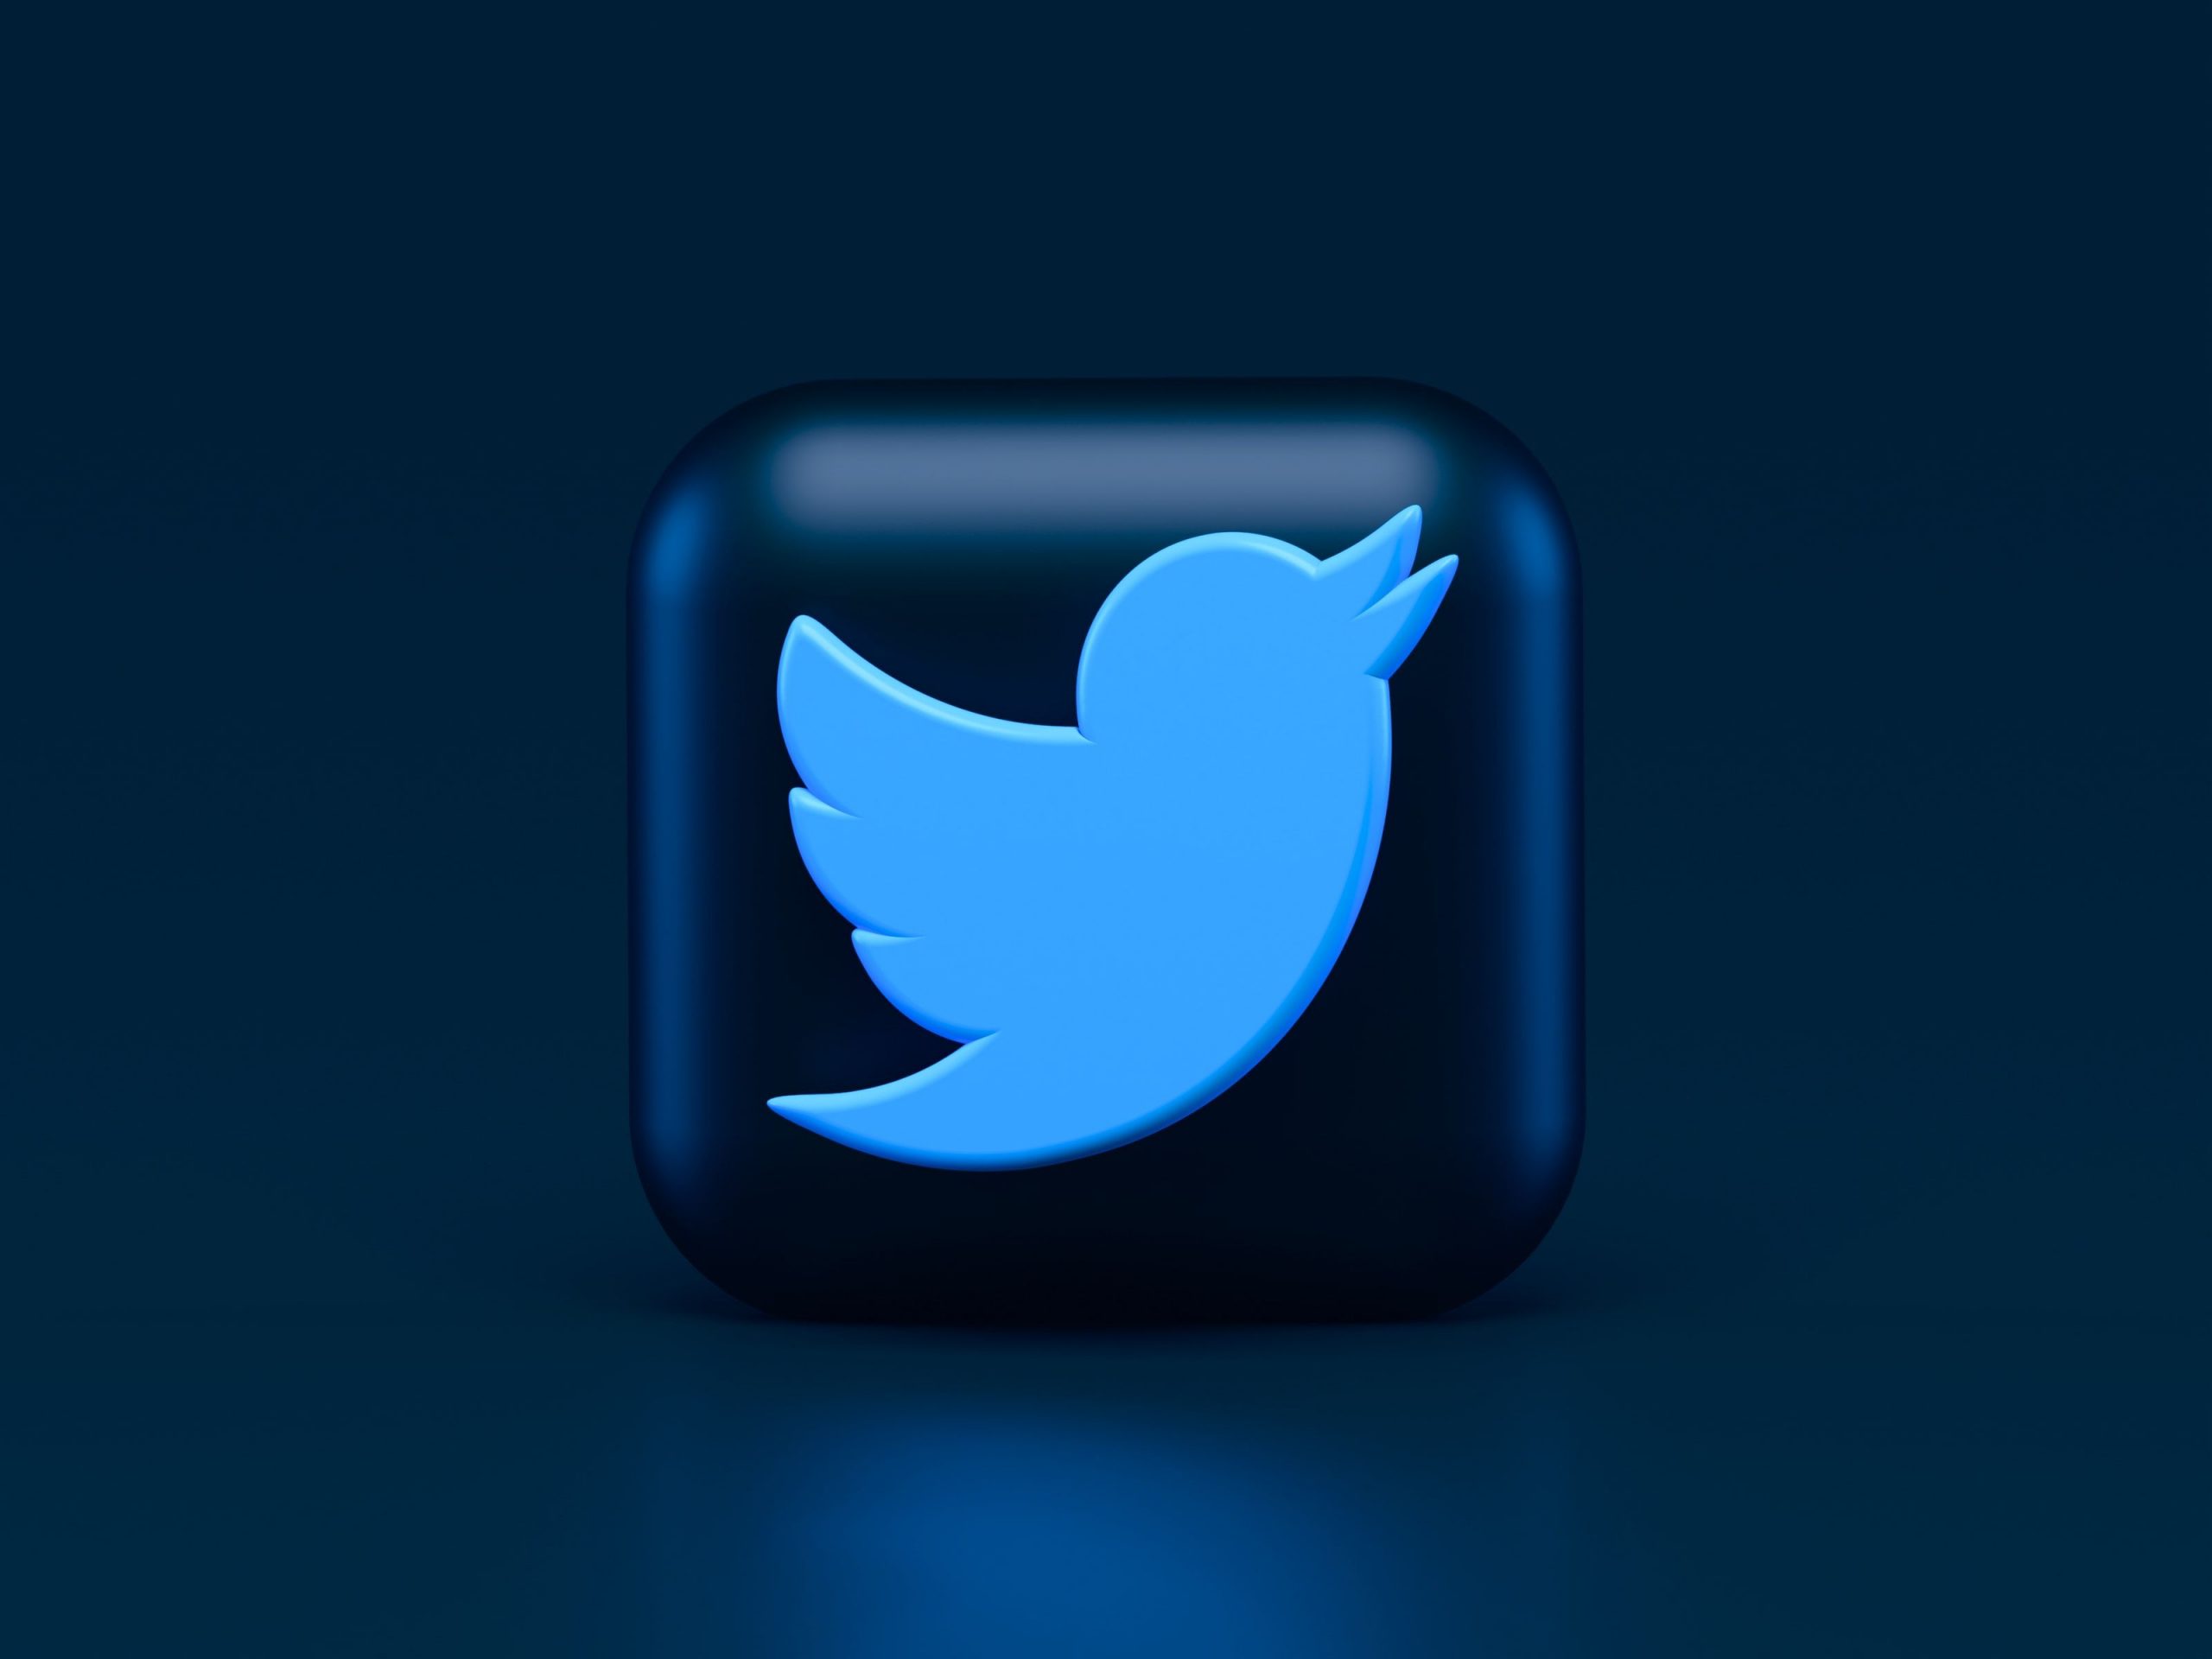 Twitter attrition hikes to 18.3% amid legal battle, whistleblowing woes